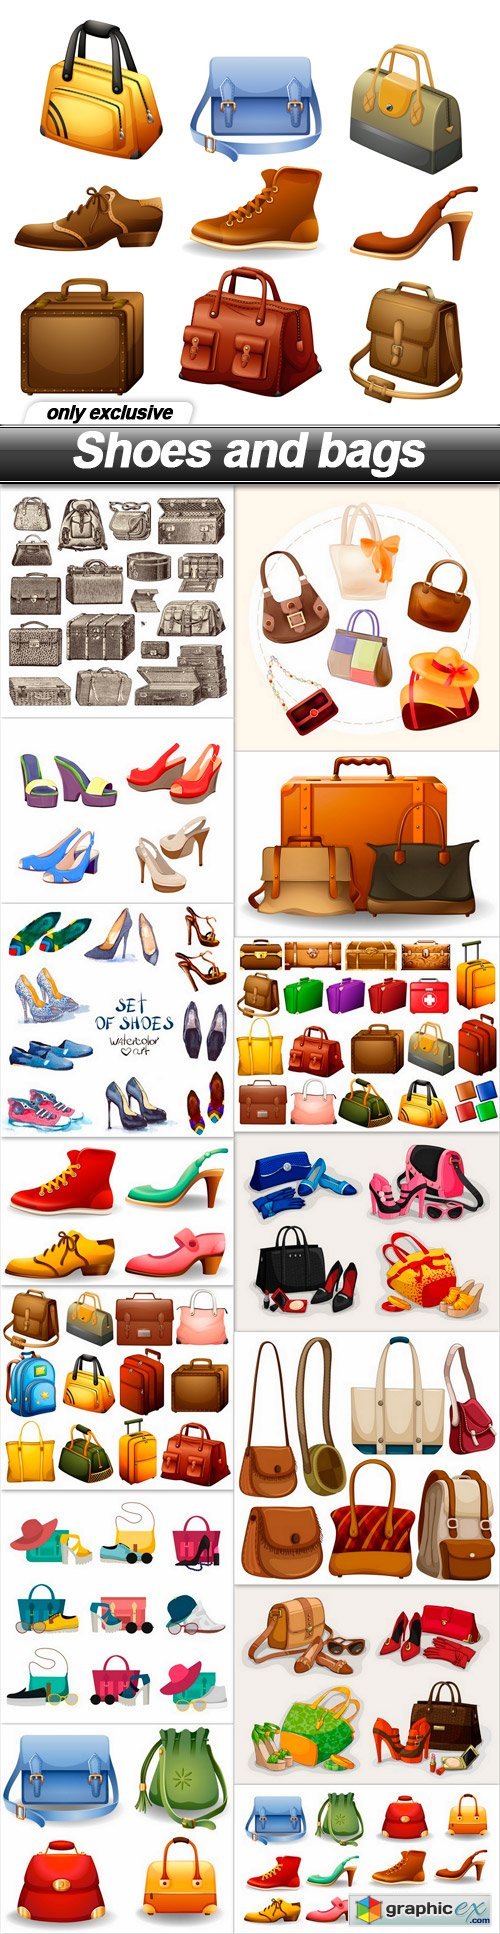 Shoes and bags - 15 EPS